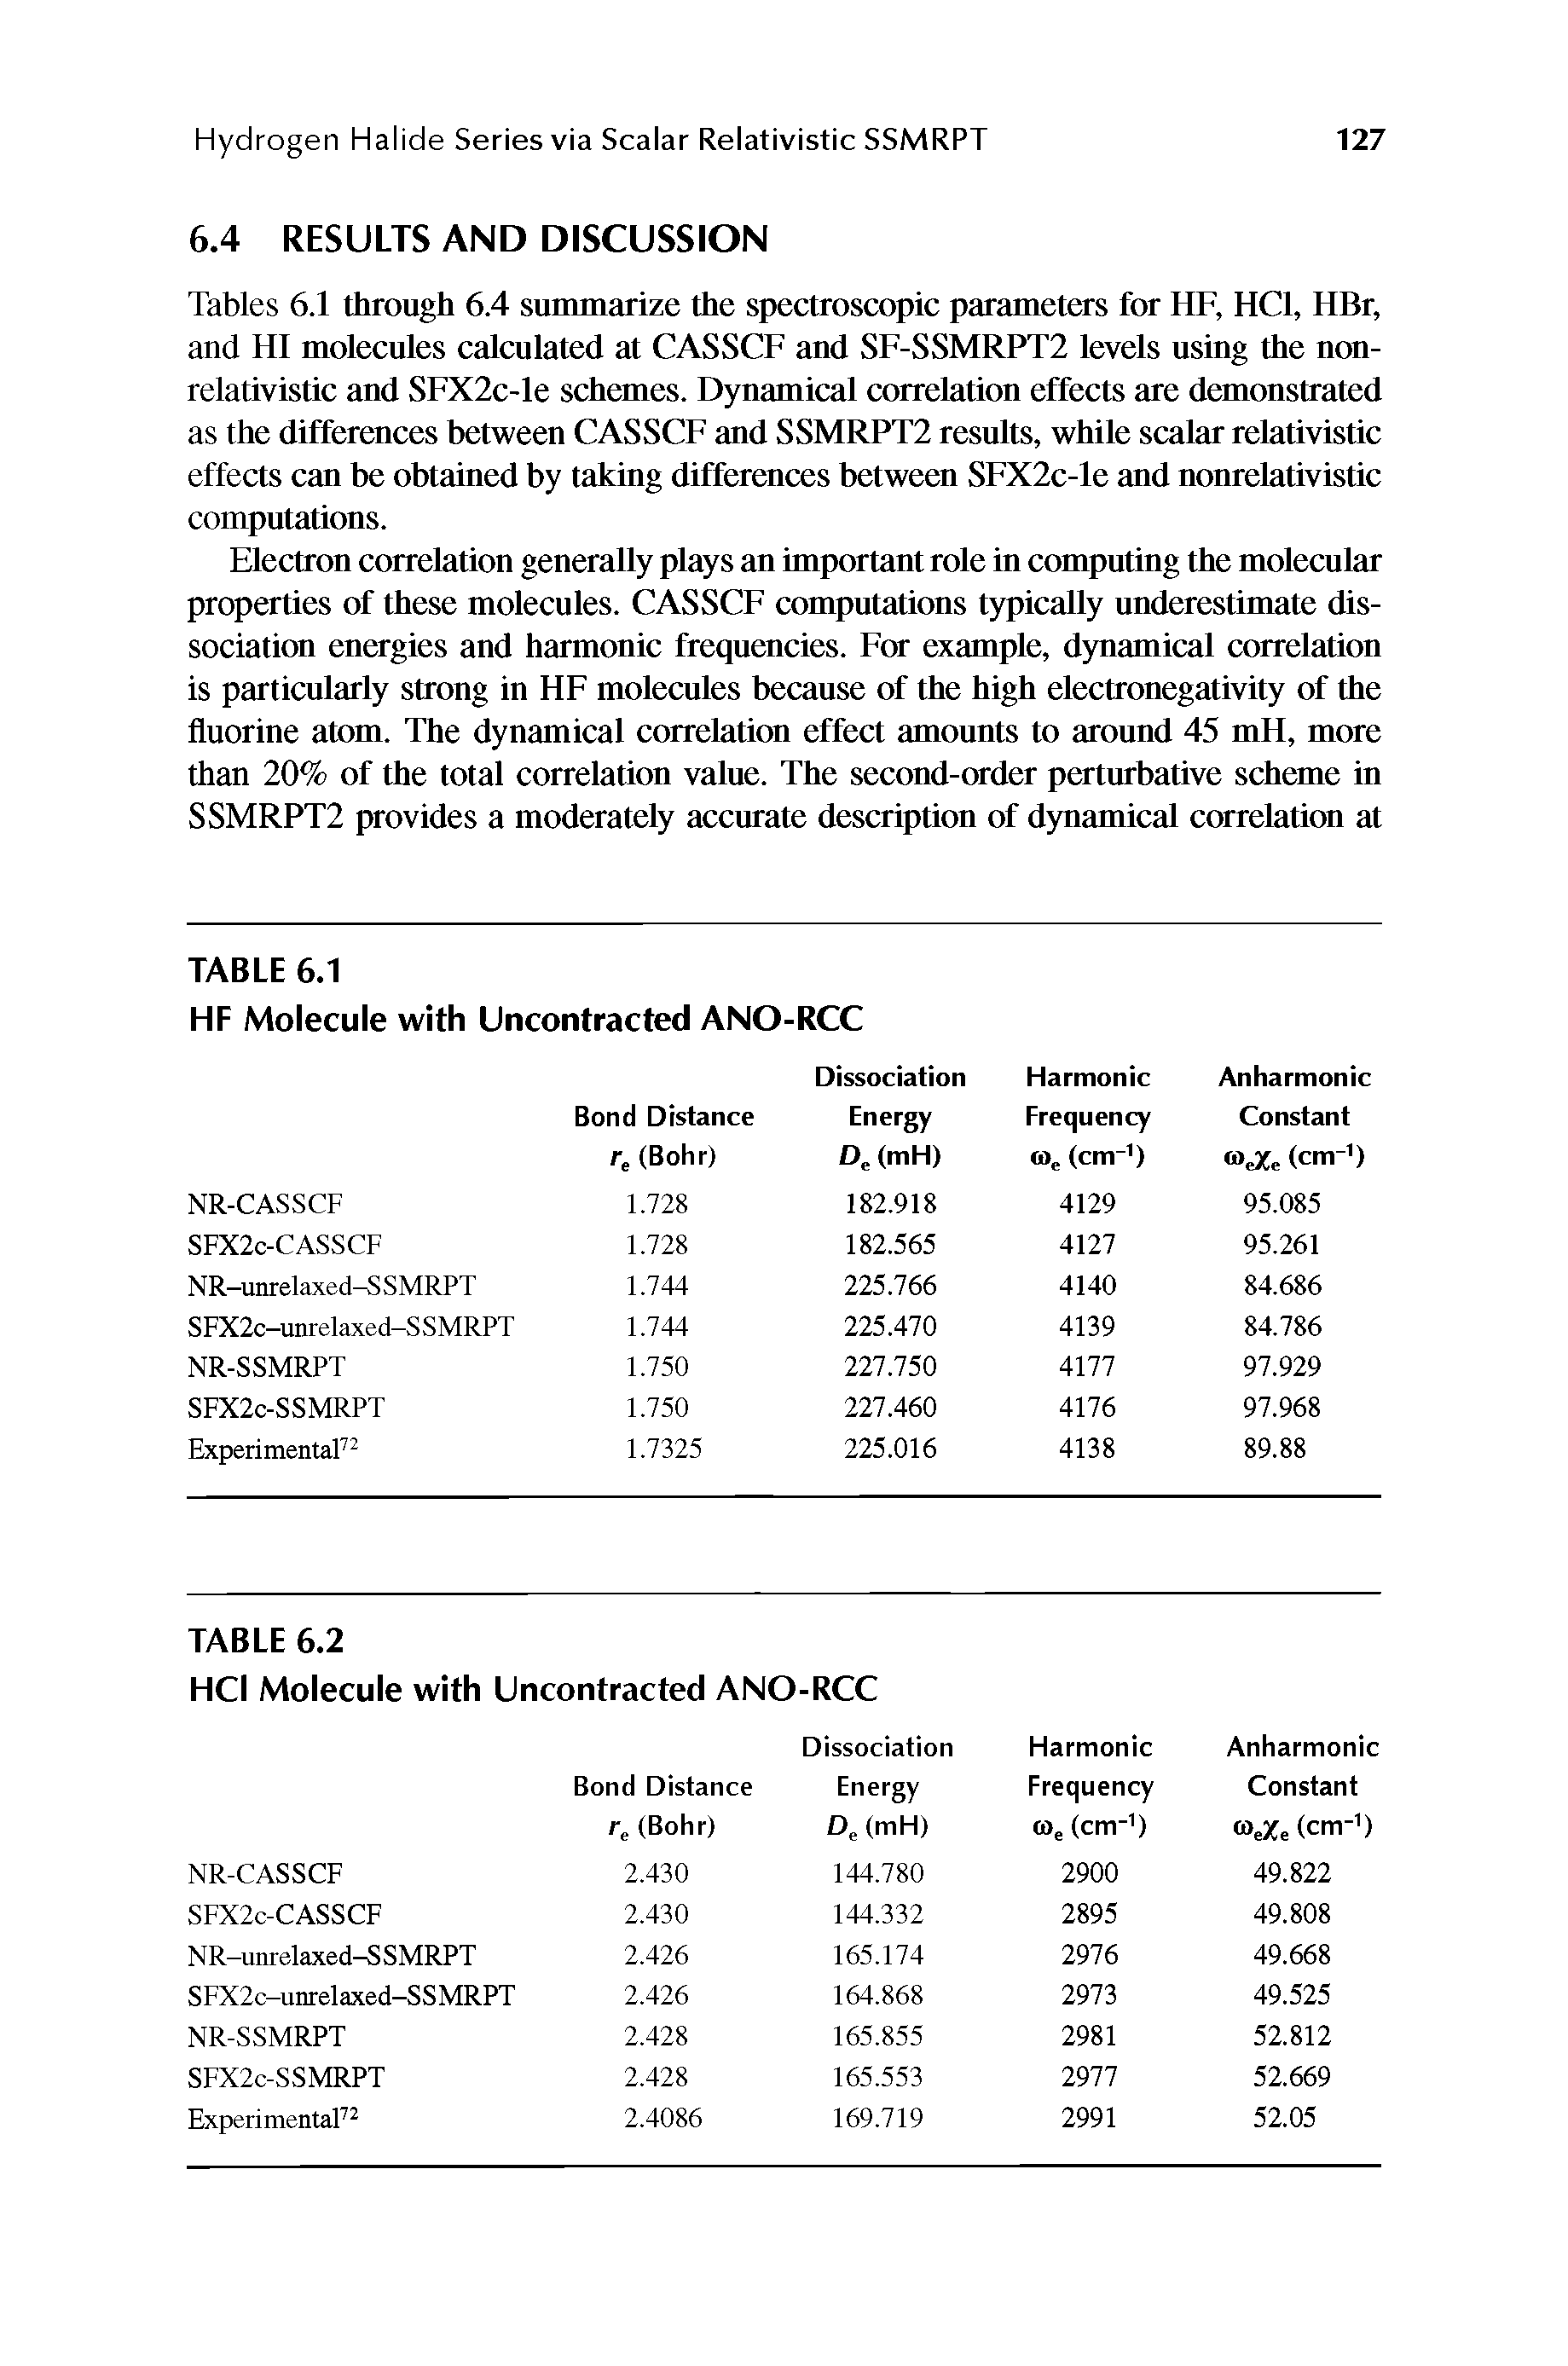 Tables 6.1 through 6.4 summarize the spectroscopic parameters for HF, HCl, HBr, and HI molecules calculated at CASSCF and SF-SSMRPT2 levels using the non-relativistic and SFX2c-le schemes. Dynamical correlation effects are demonstrated as the differences between CASSCF and SSMRPT2 results, while scalar relativistic effects can be obtained by taking differences between SFX2c-le and nonrelativistic computations.